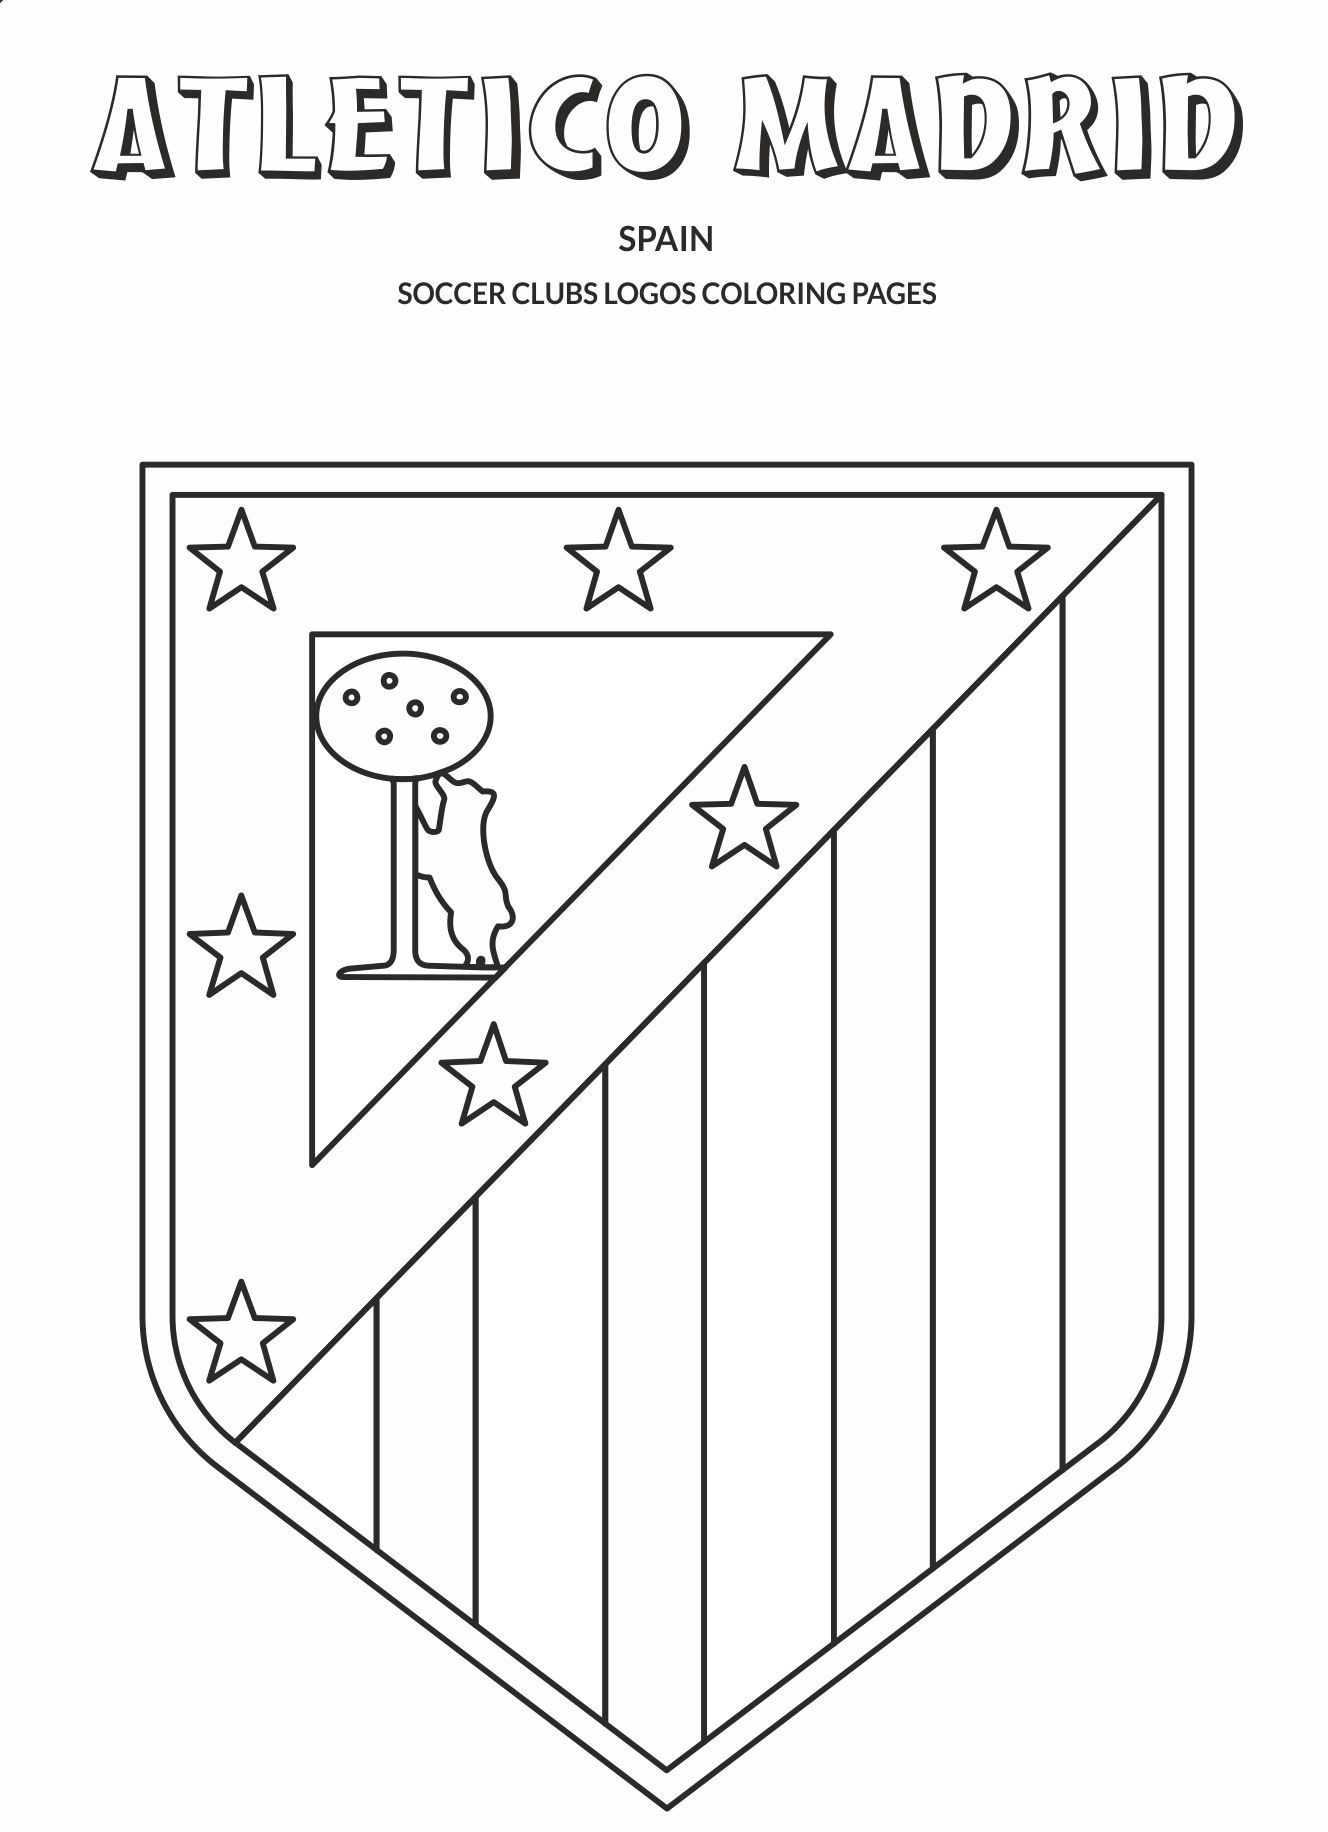 atletico madrid logo coloring pages